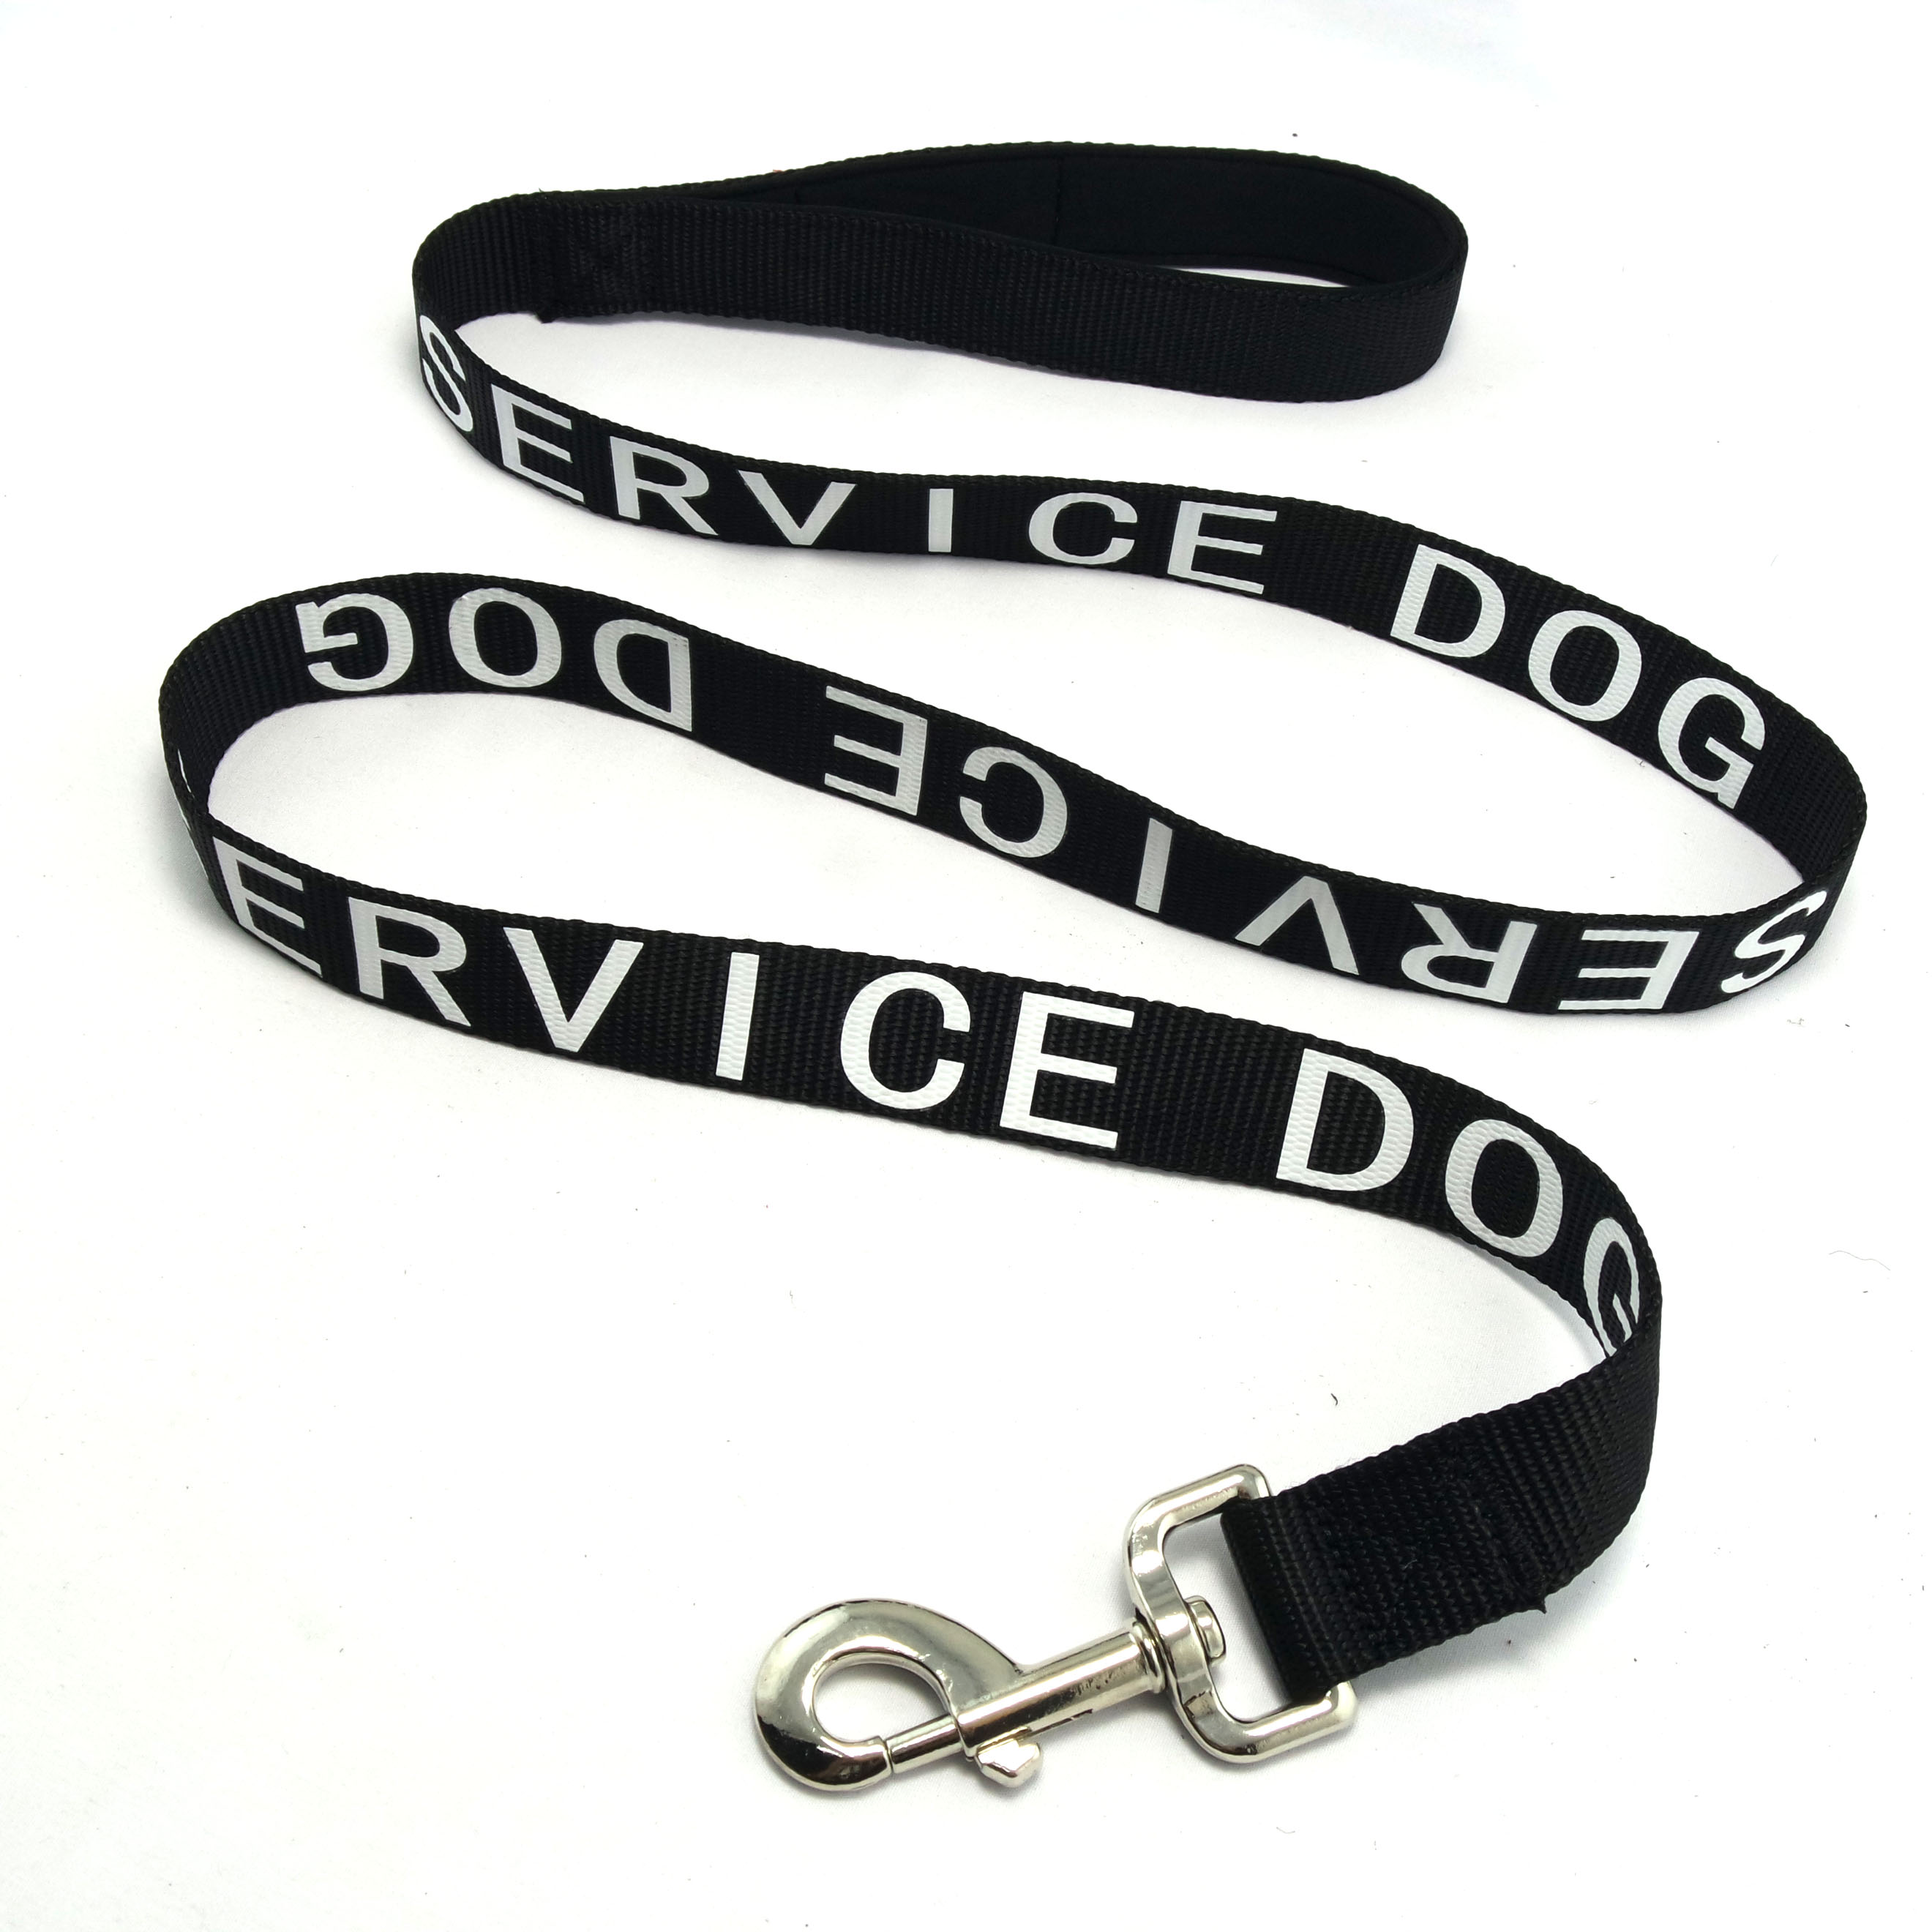 Service Dog Leash Wrap Emotional Support animal leash and Reflective Lettering Supplies or Accessories for Service Dog Vest: Black text 2